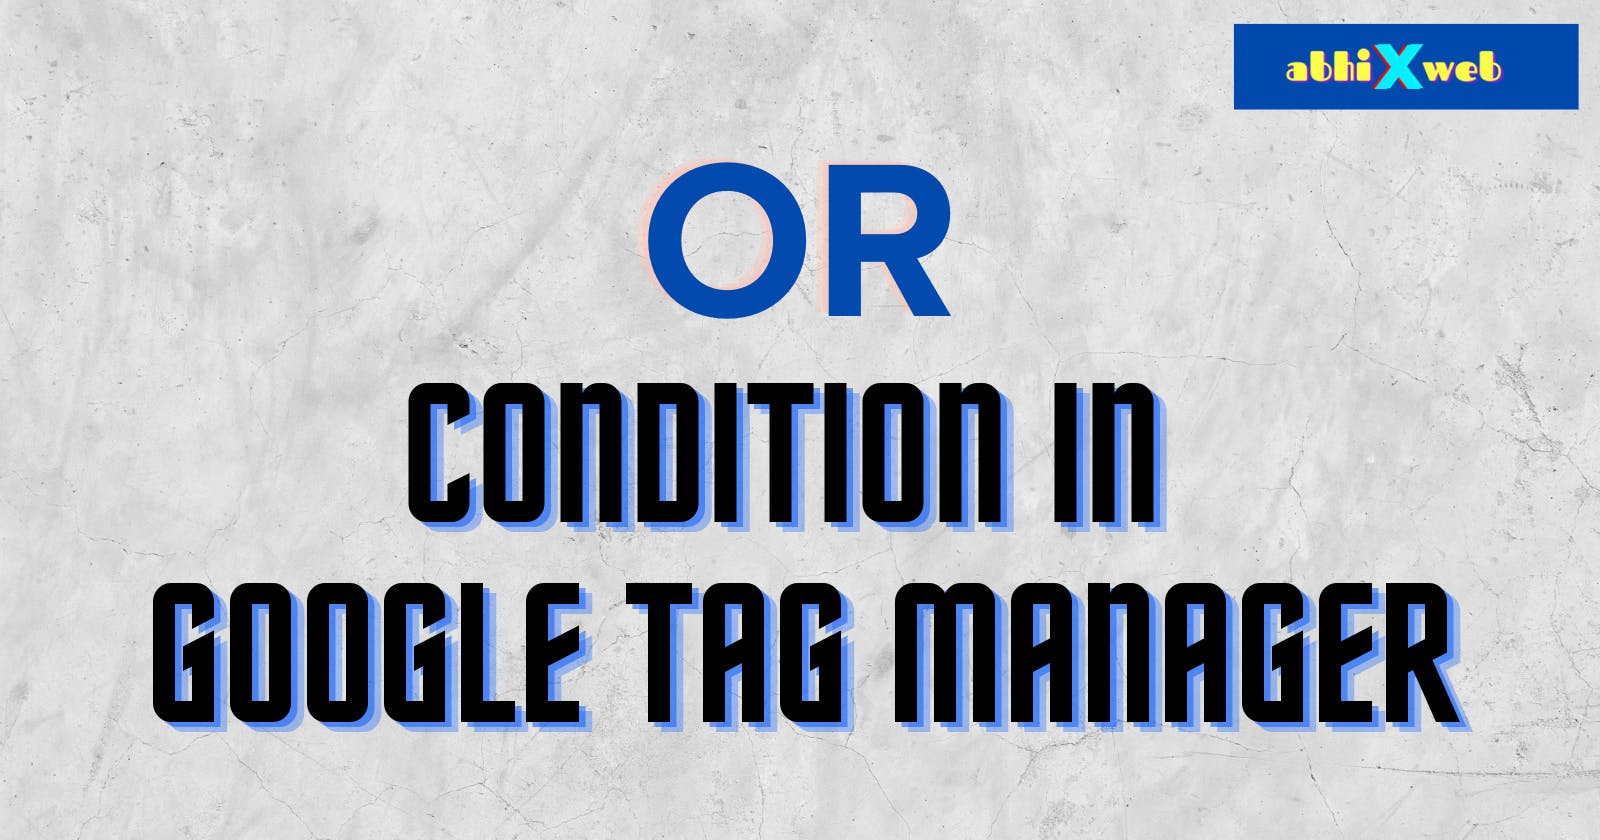 How to add multiple conditions in GTM (Google Tag Manager)?